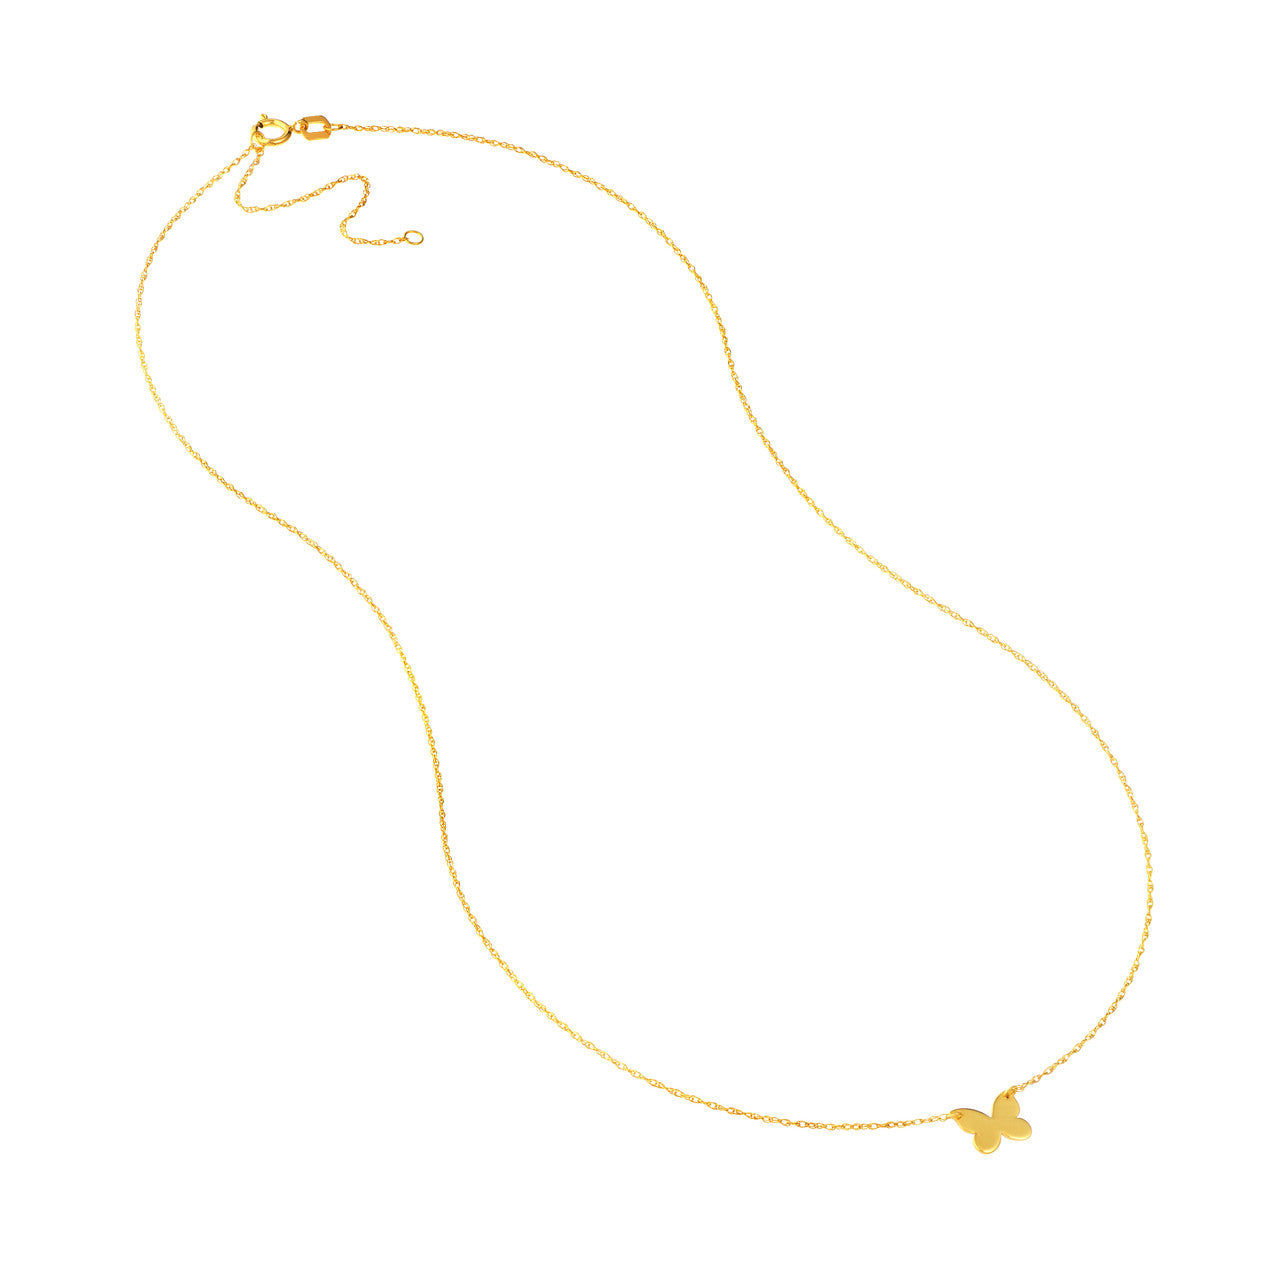 14K Solid Gold - Wish Butterfly Necklace